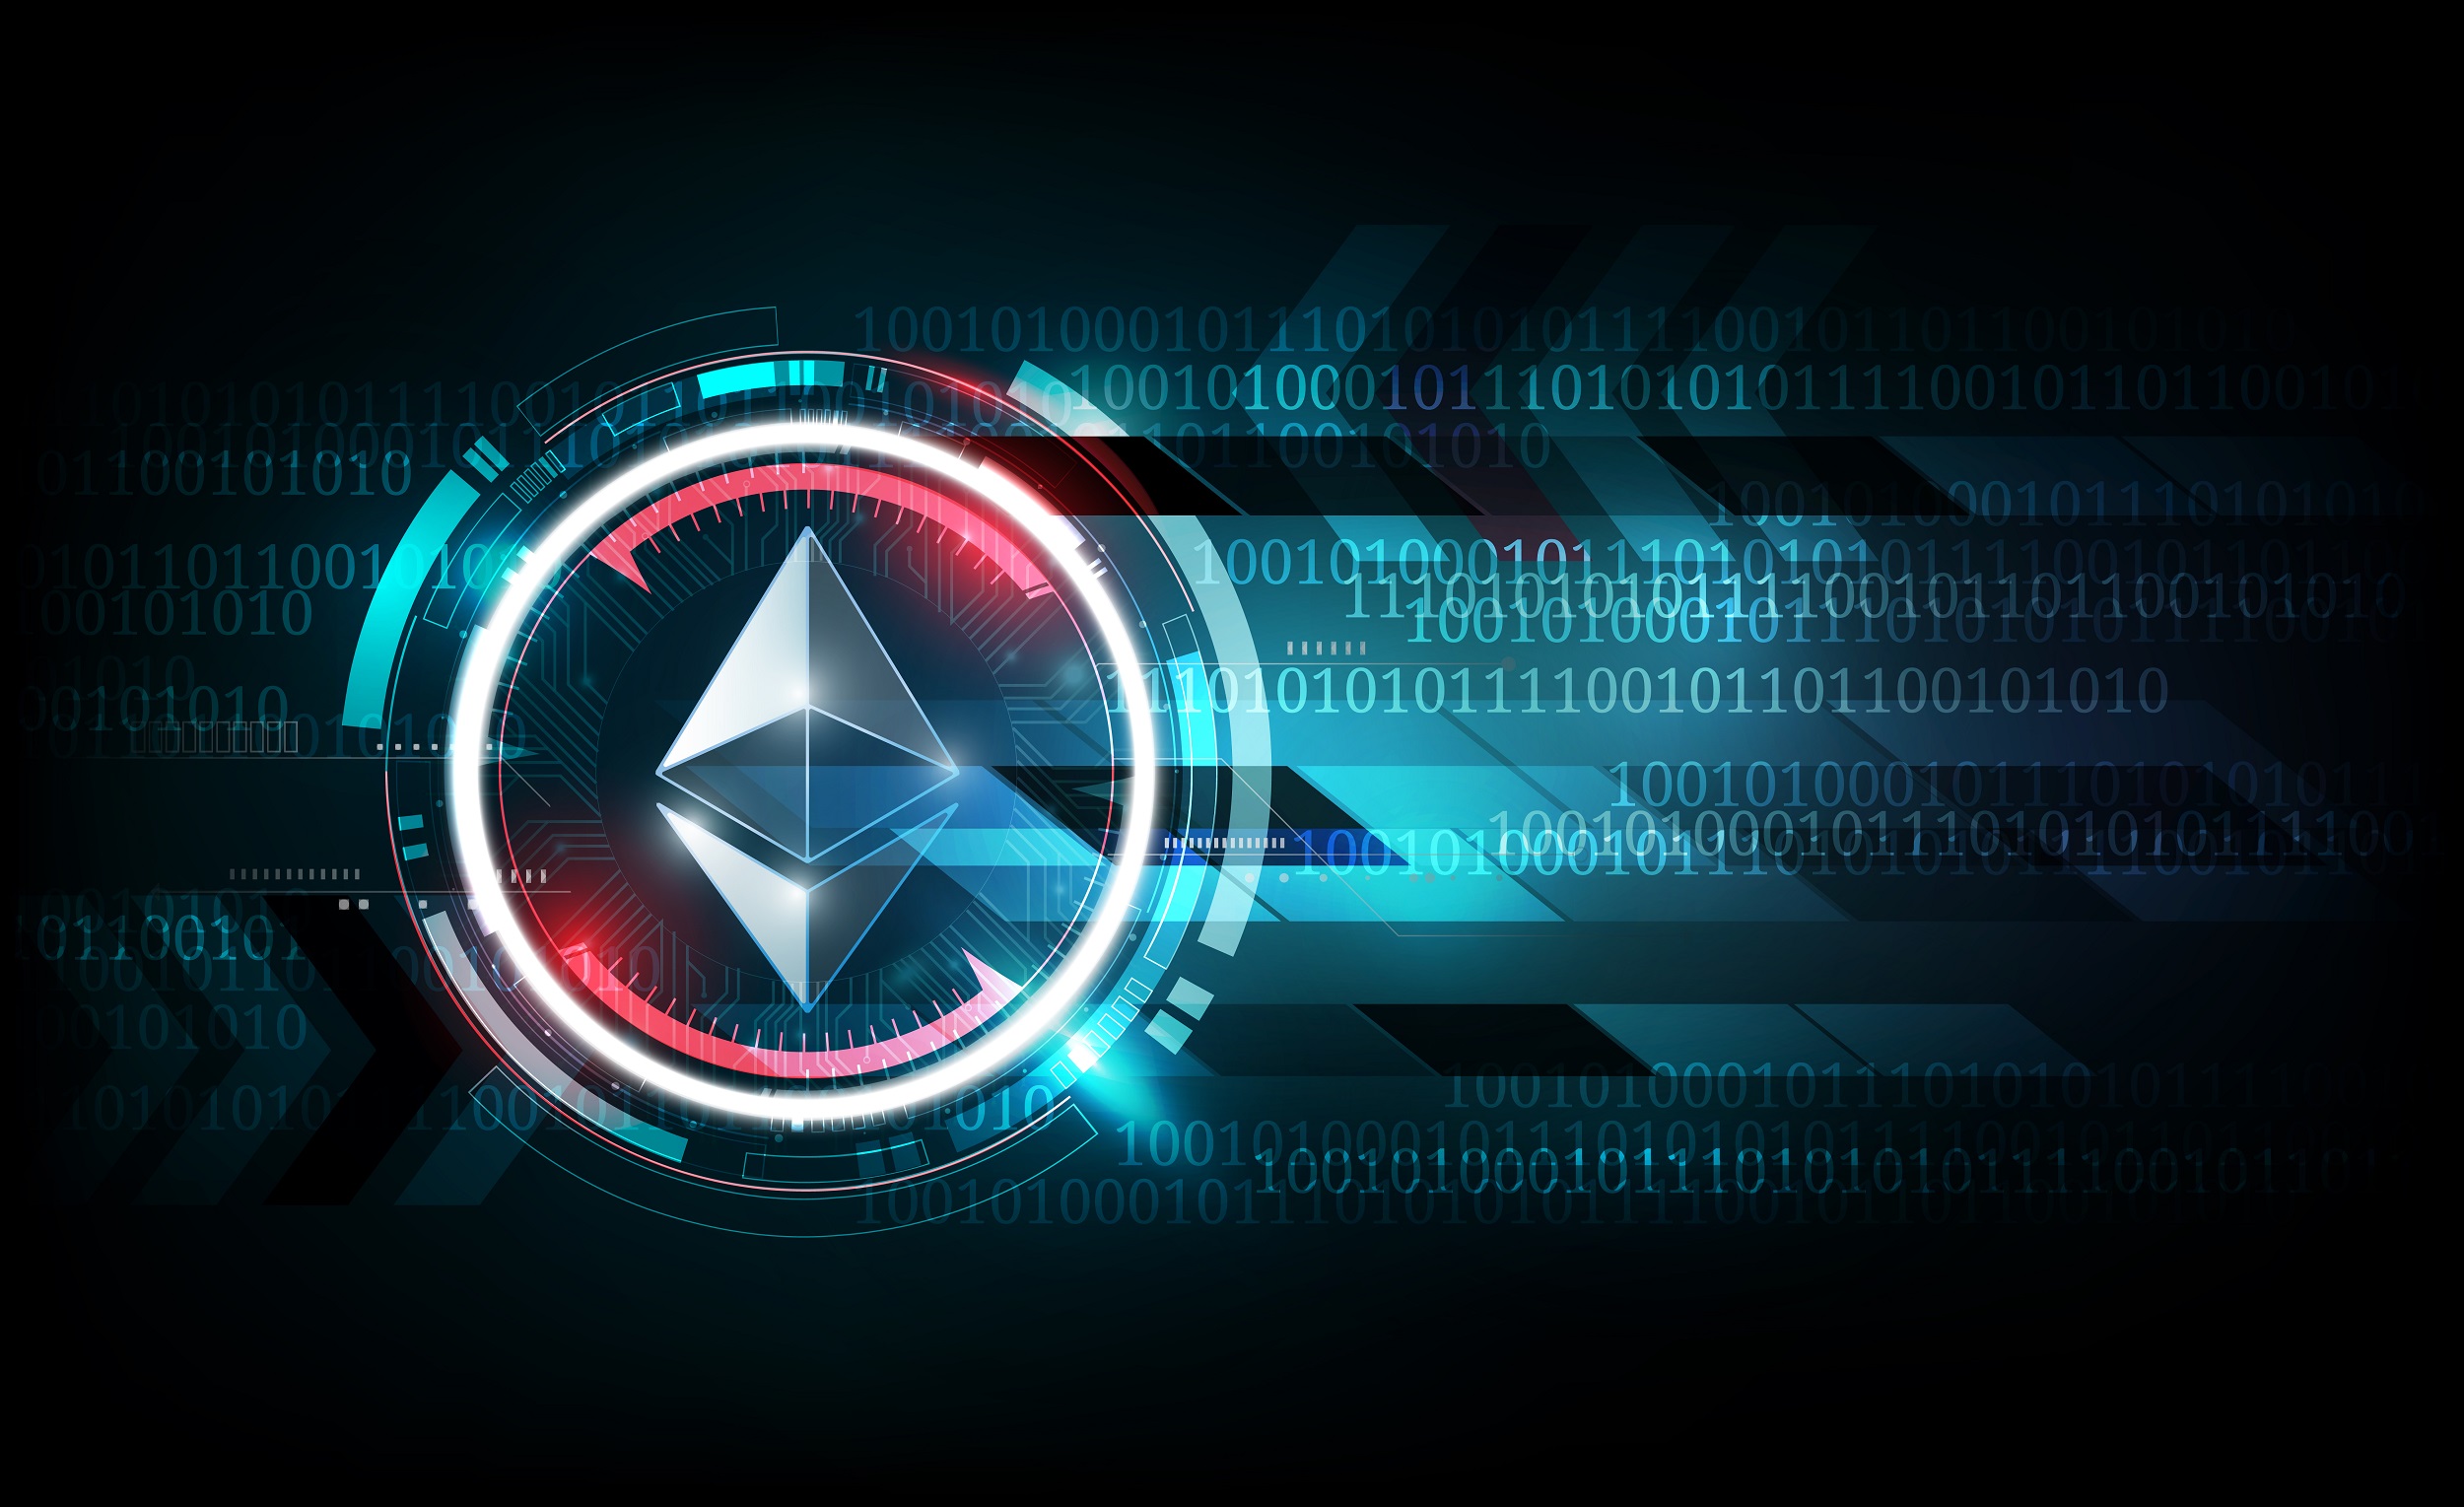  ethereum price enthusiast network claims attack drop 